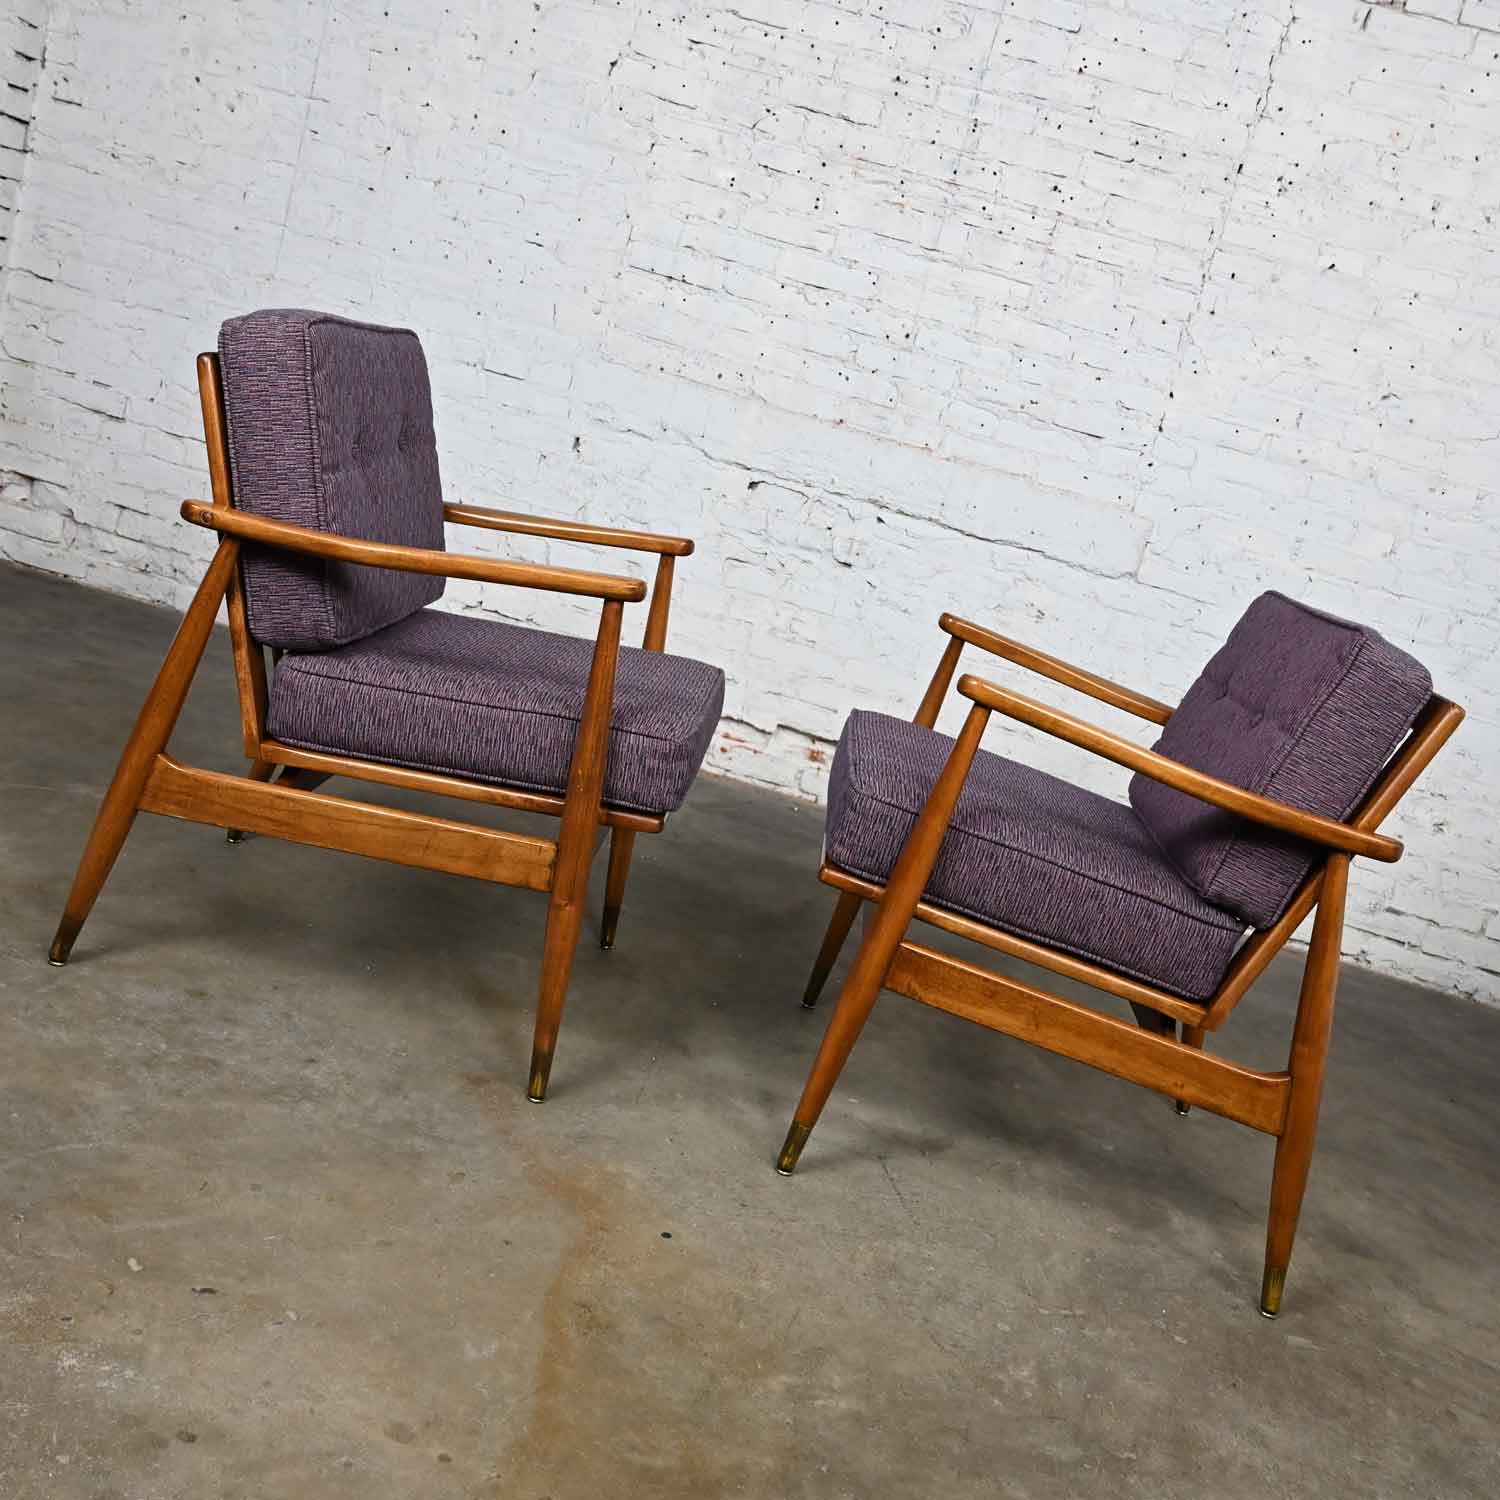 Mid-20th Century Modern Arm Lounge Chairs Tapered Legs & Brass Sabots Style of Folke Ohlsson for DUX